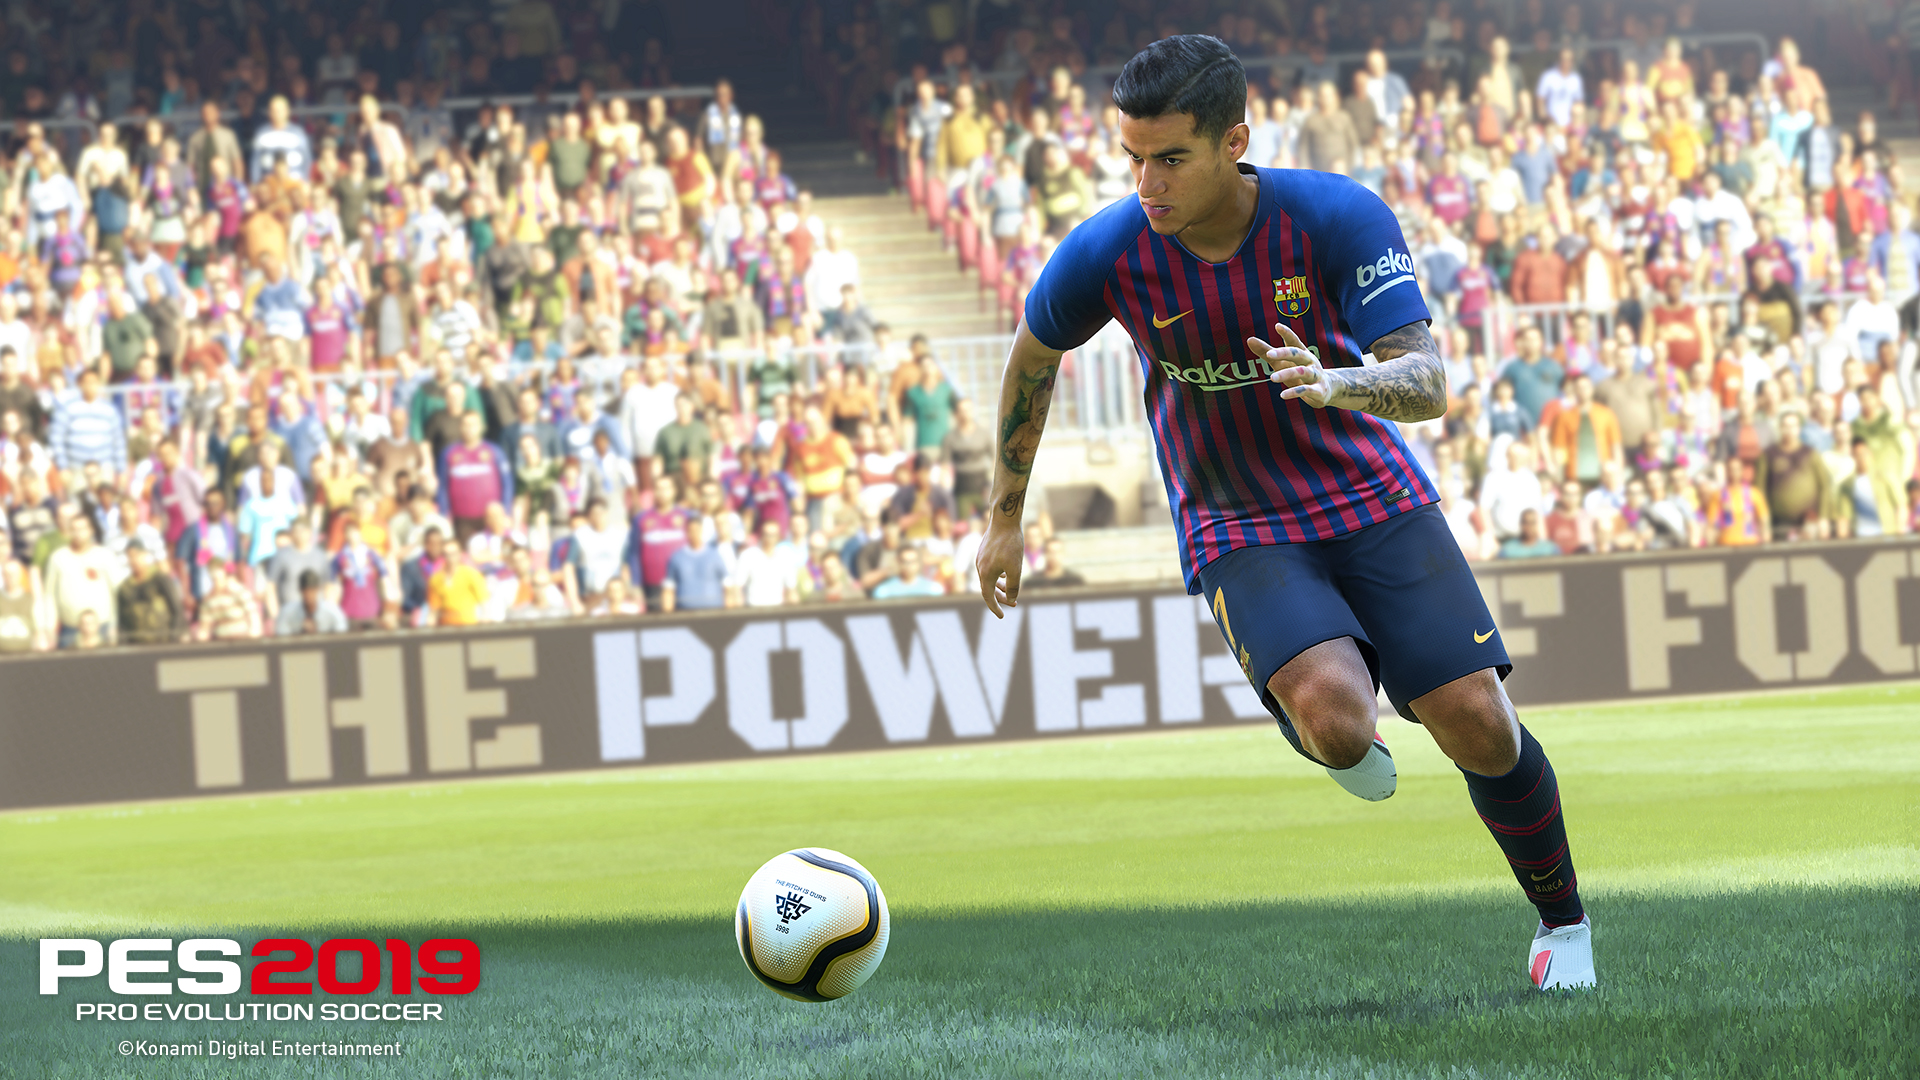 PES 2019 Coutinho running with the ball